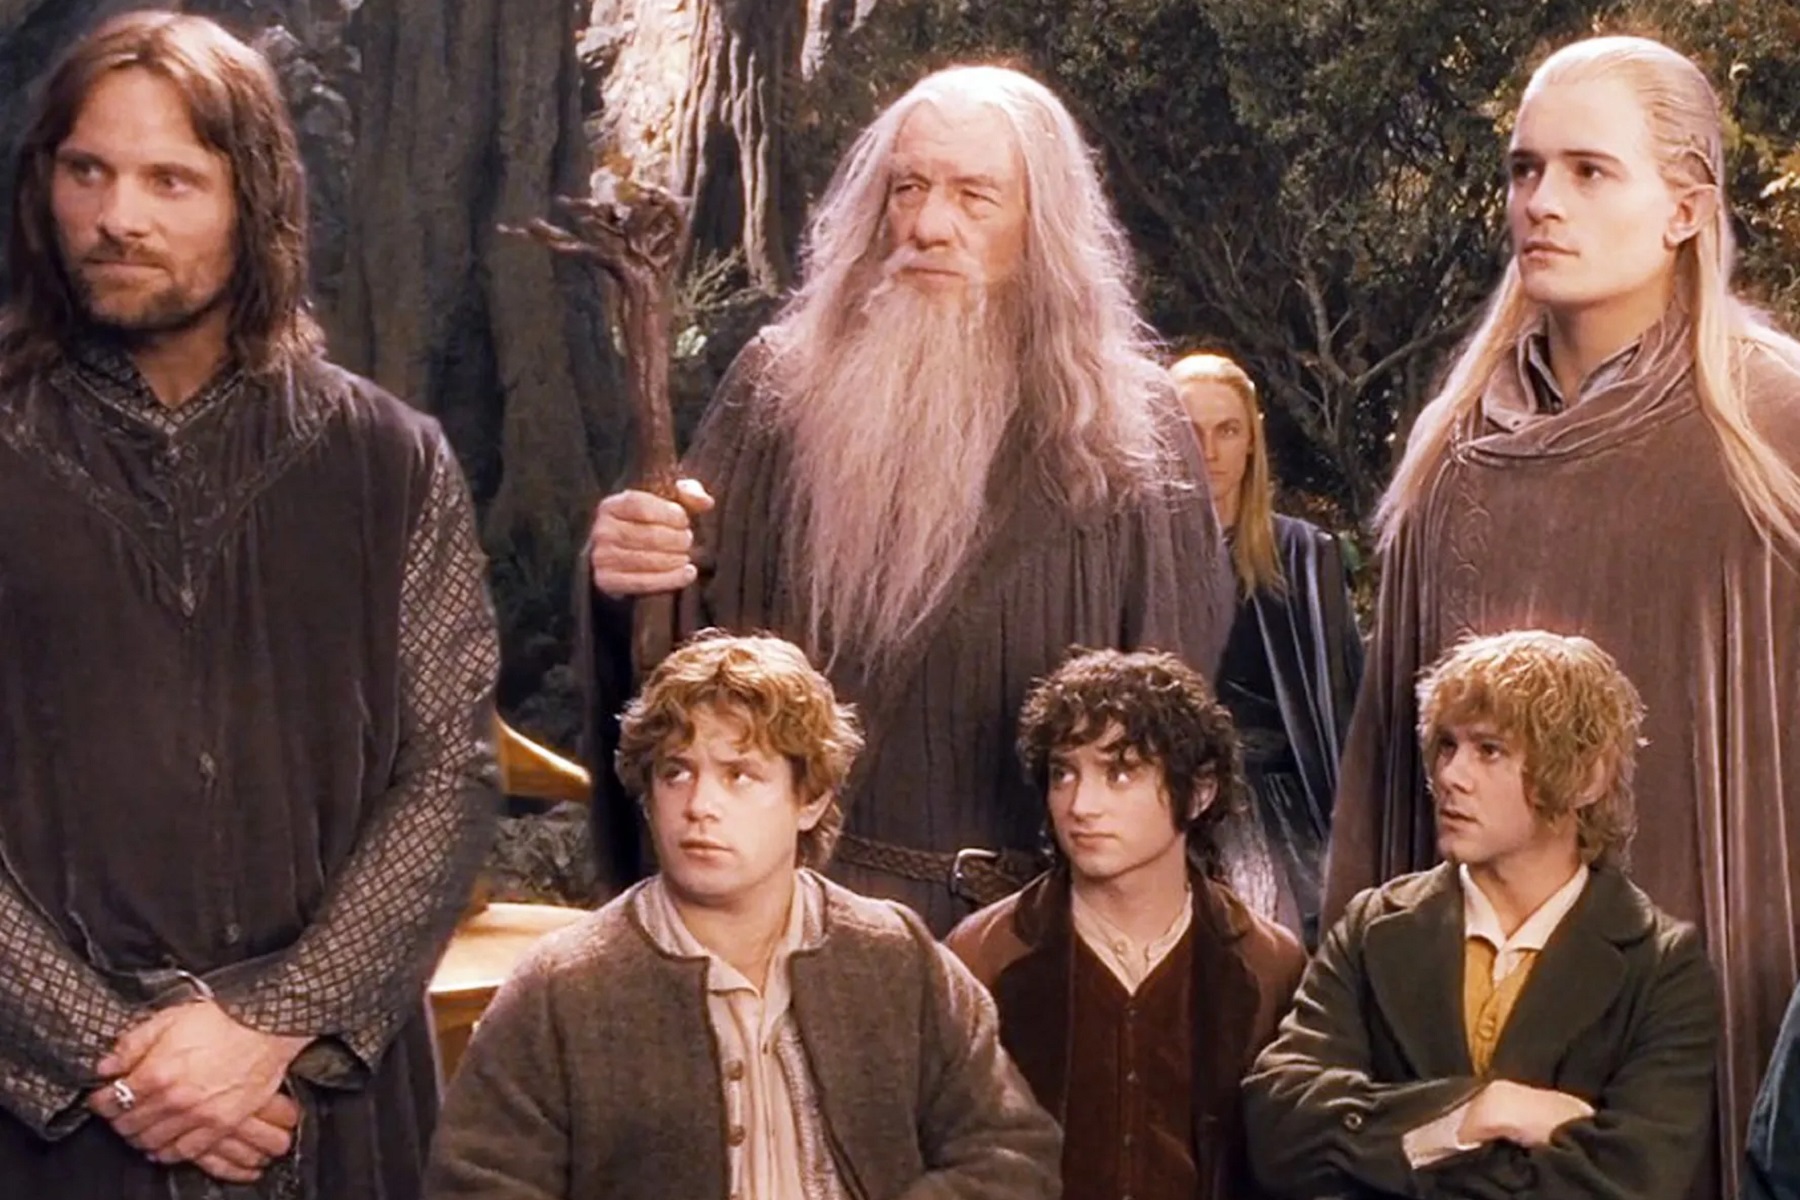 Every Fellowship Of The Ring Member From Lord Of The Rings Ranked